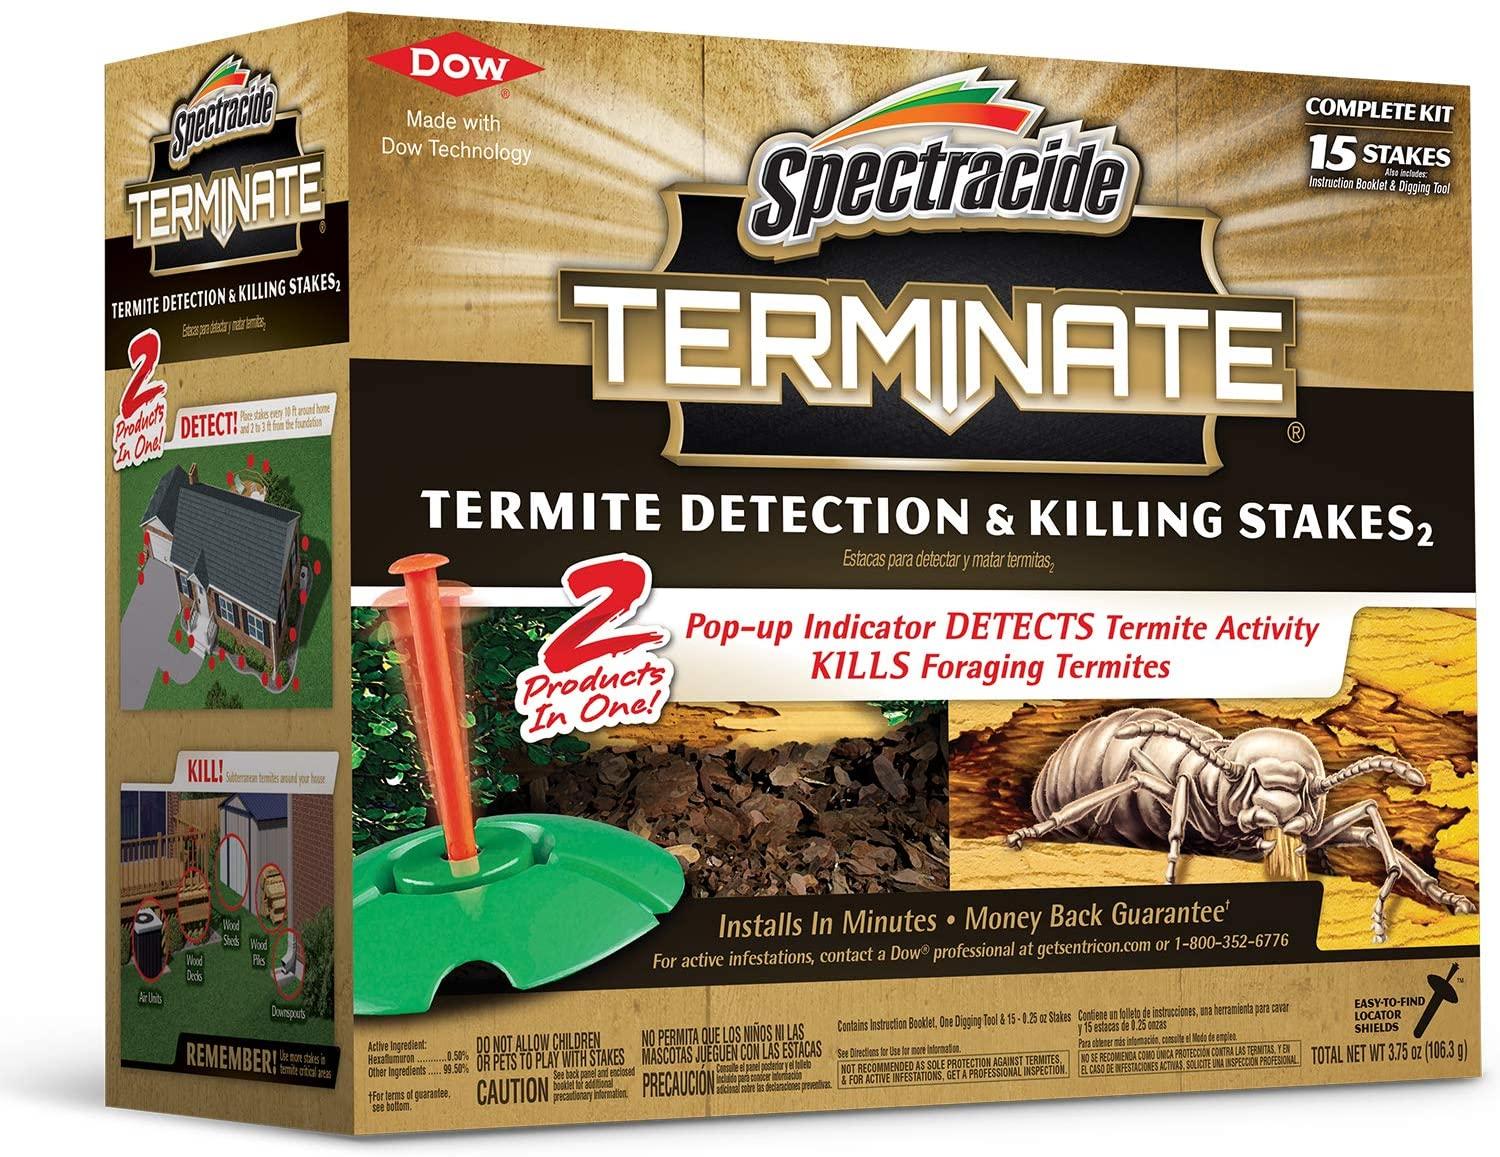 15 Spectracide Terminate Termite Detection and Killing Stakes for $38.90 Shipped